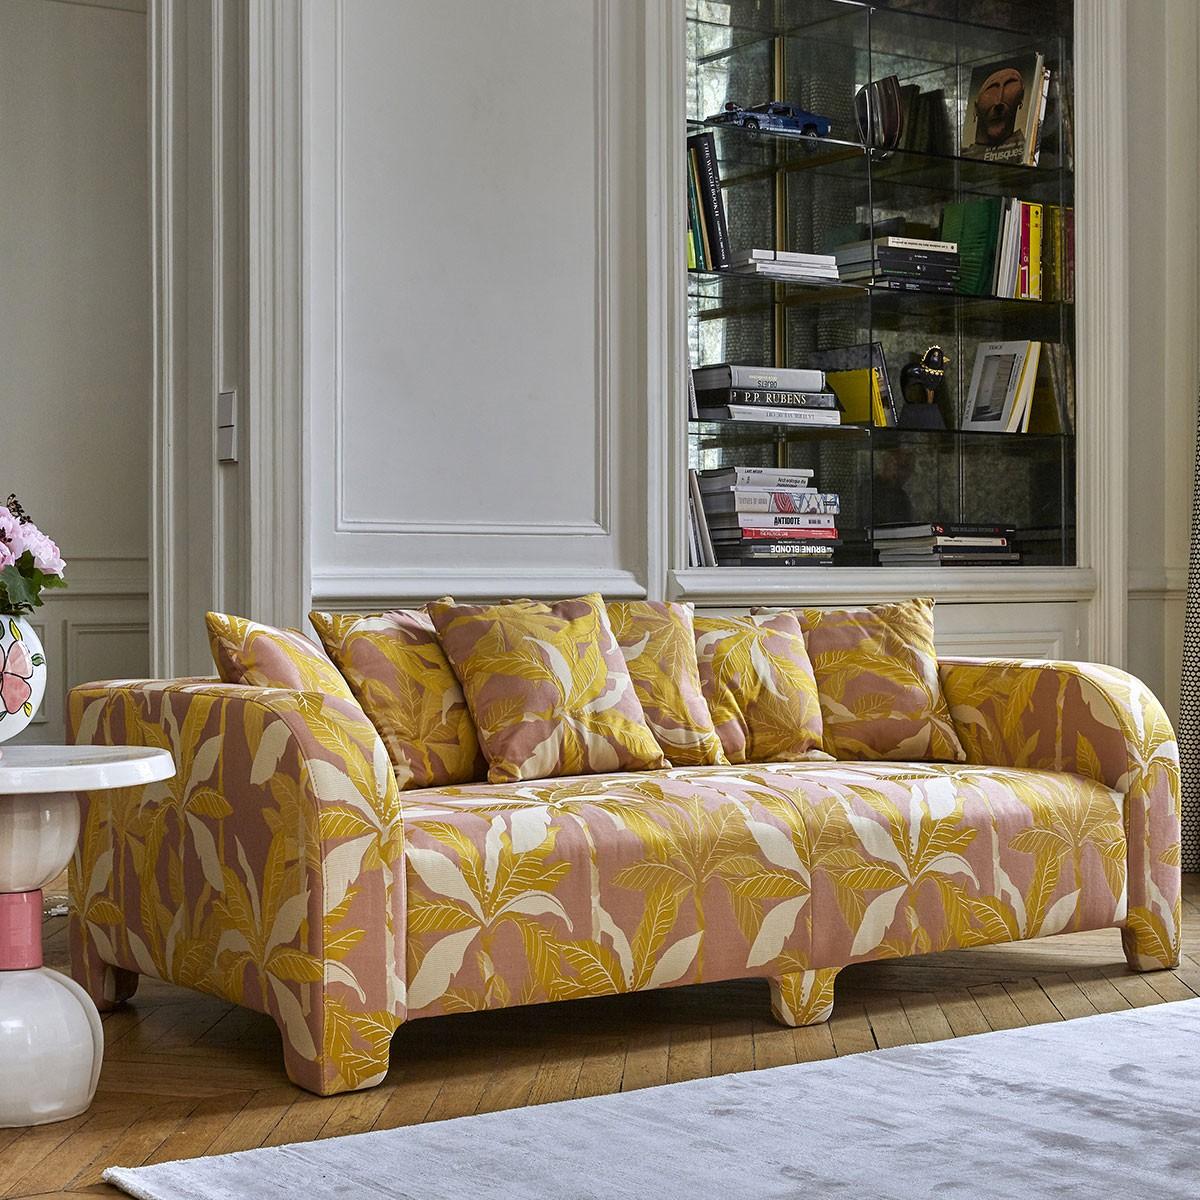 Popus Editions Graziella 4 seater sofa in corn megeve fabric knit effect

A foot that hides another. A cushion that hides another. A curve that hides another with contemporary lines and a base like a punctuation mark, this sofa gives pride of